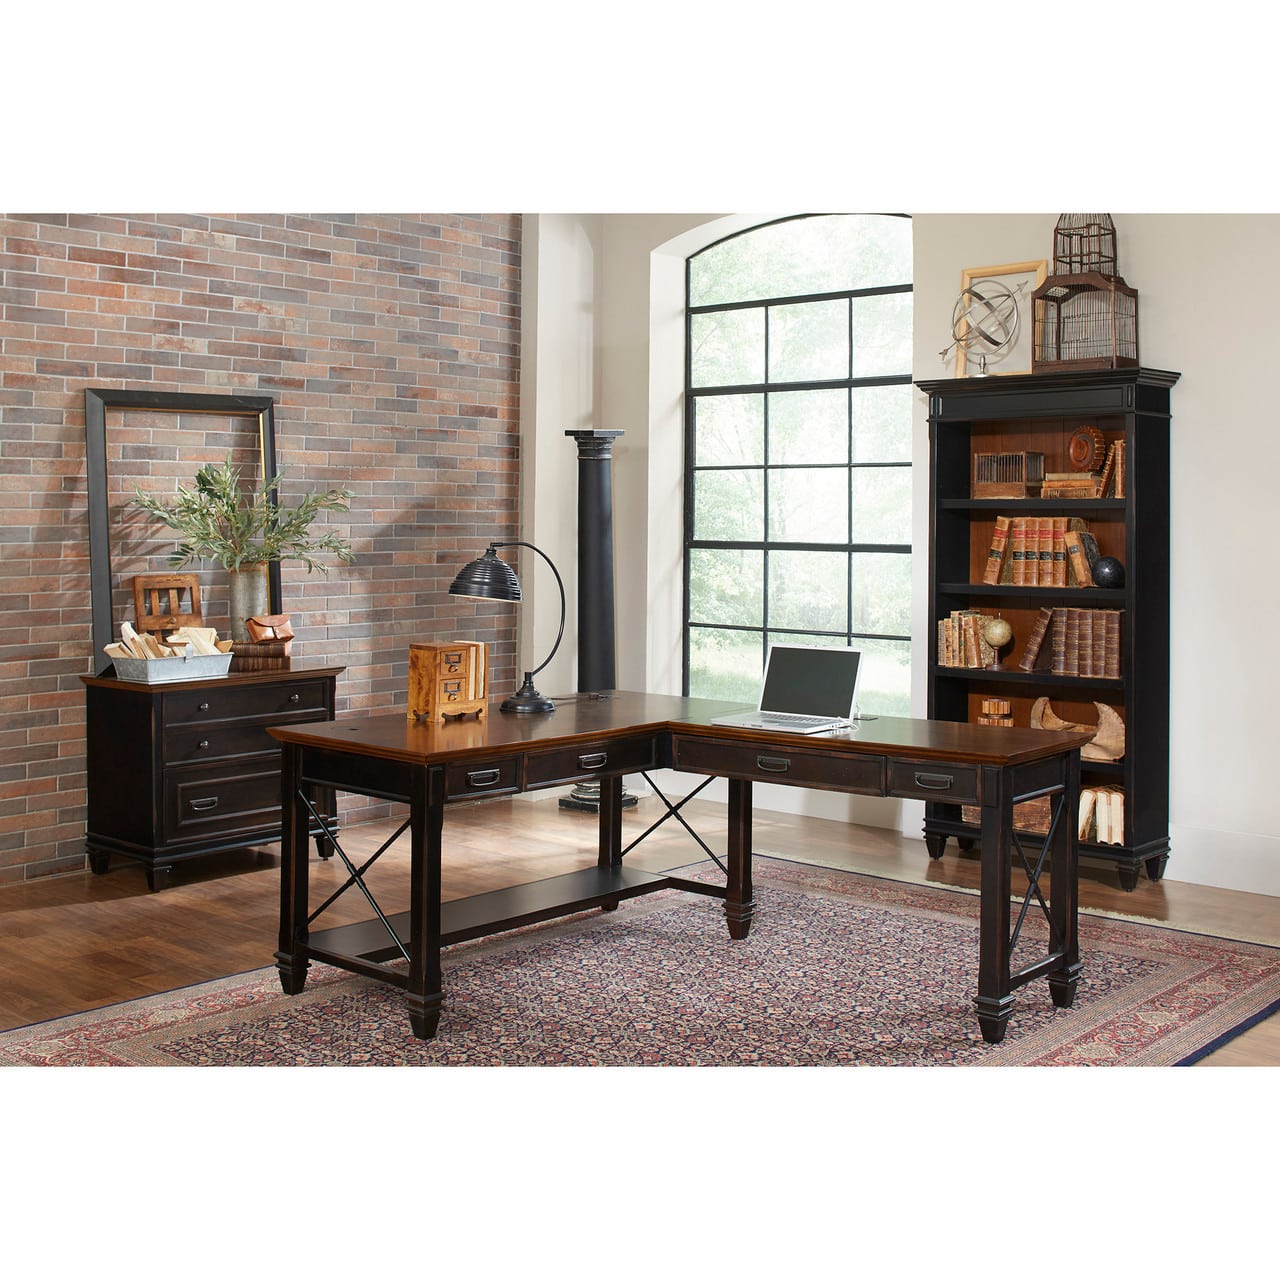 refined collection in vintage black, room set up, new!